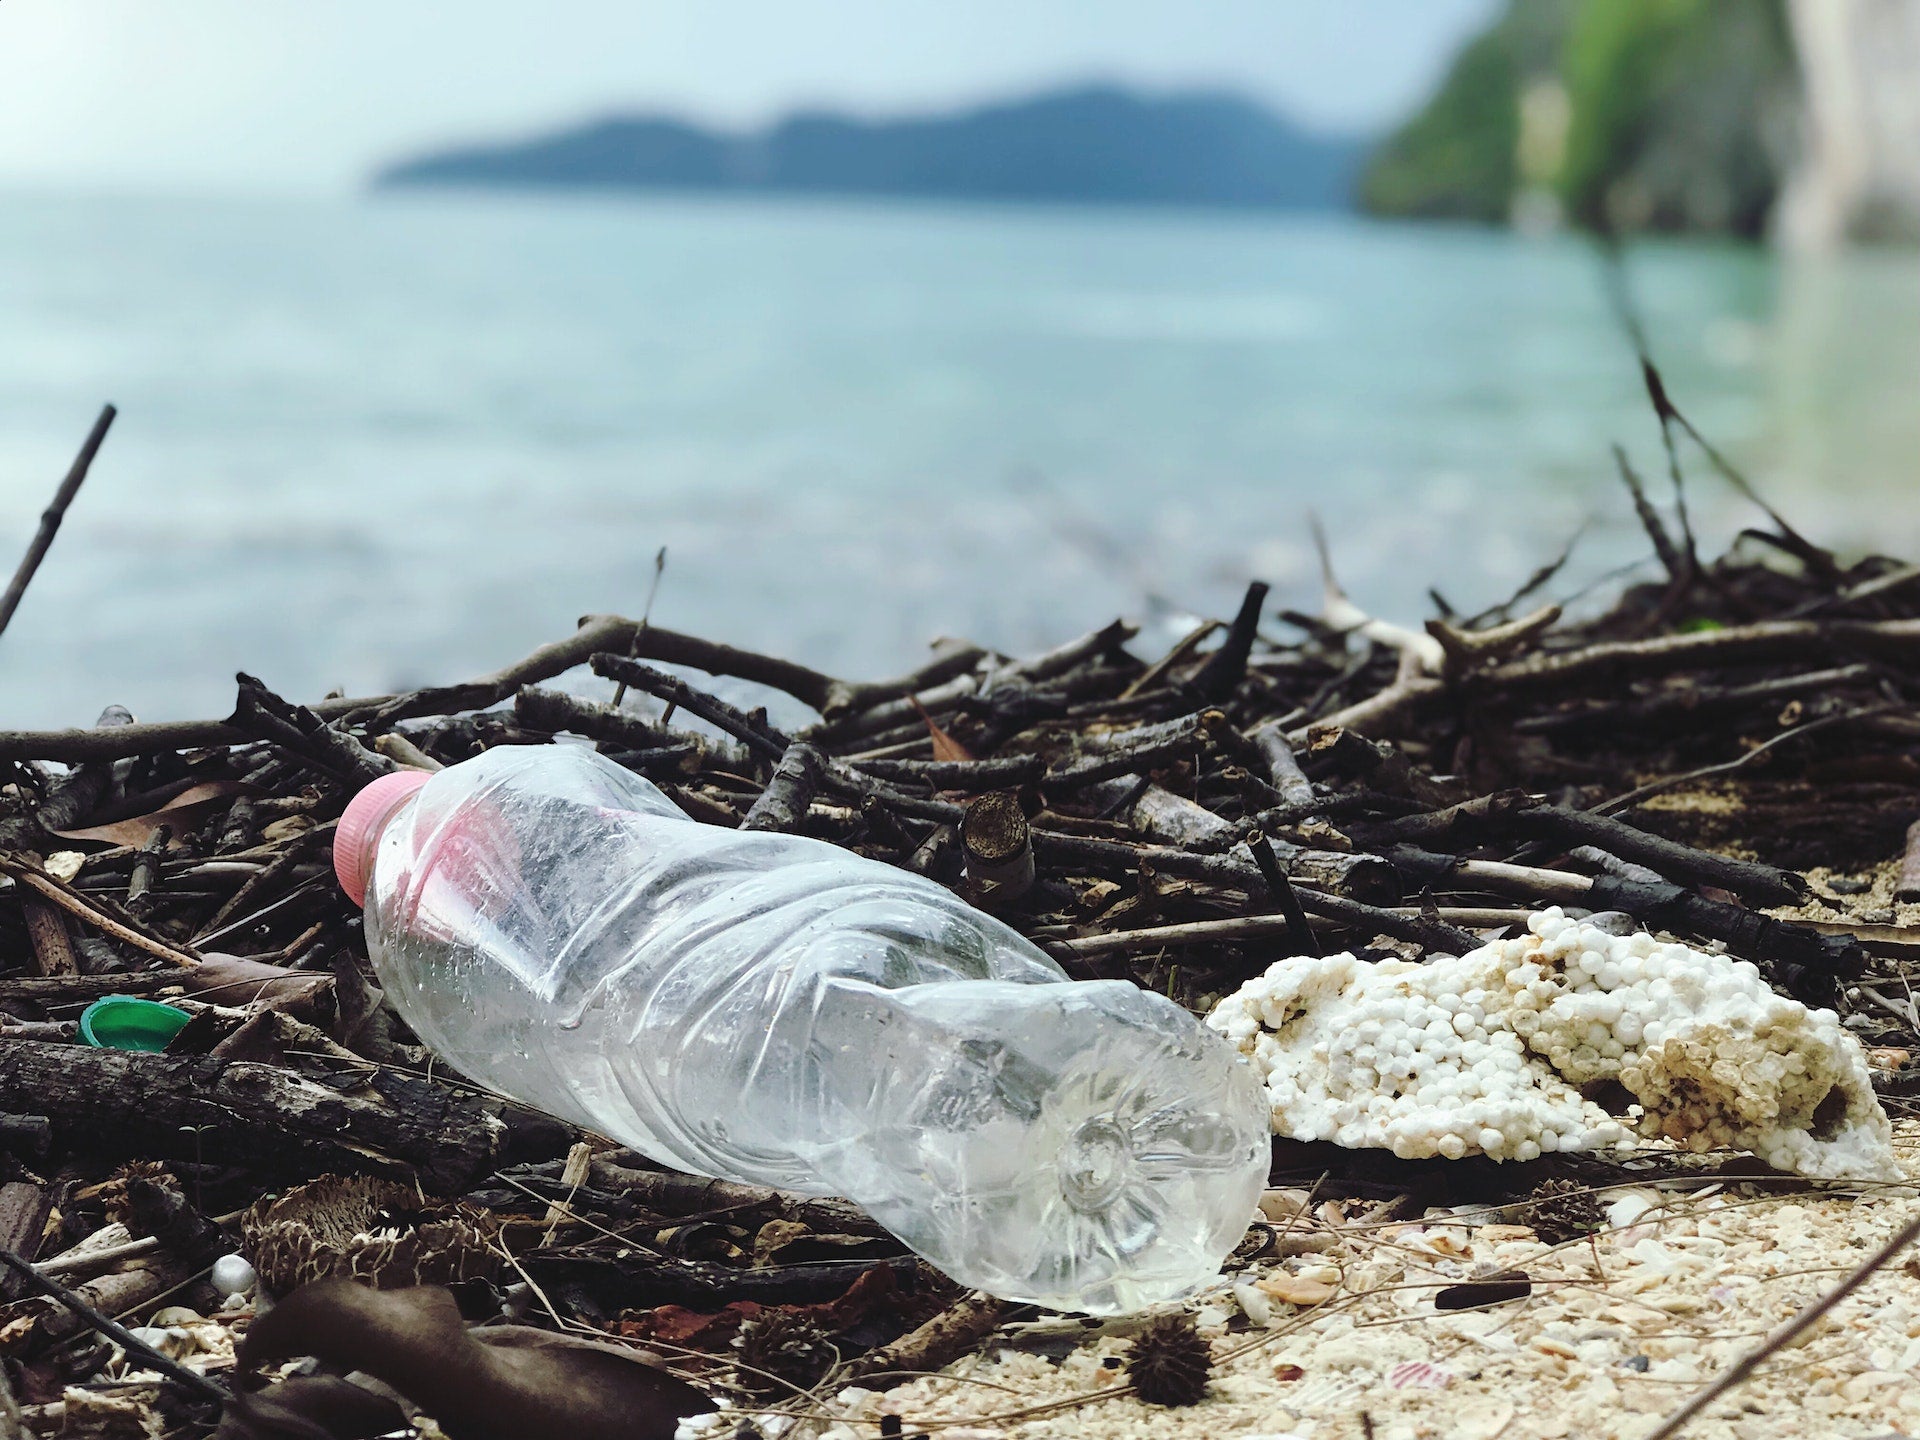 Plastic bottles hinder universal clean water access